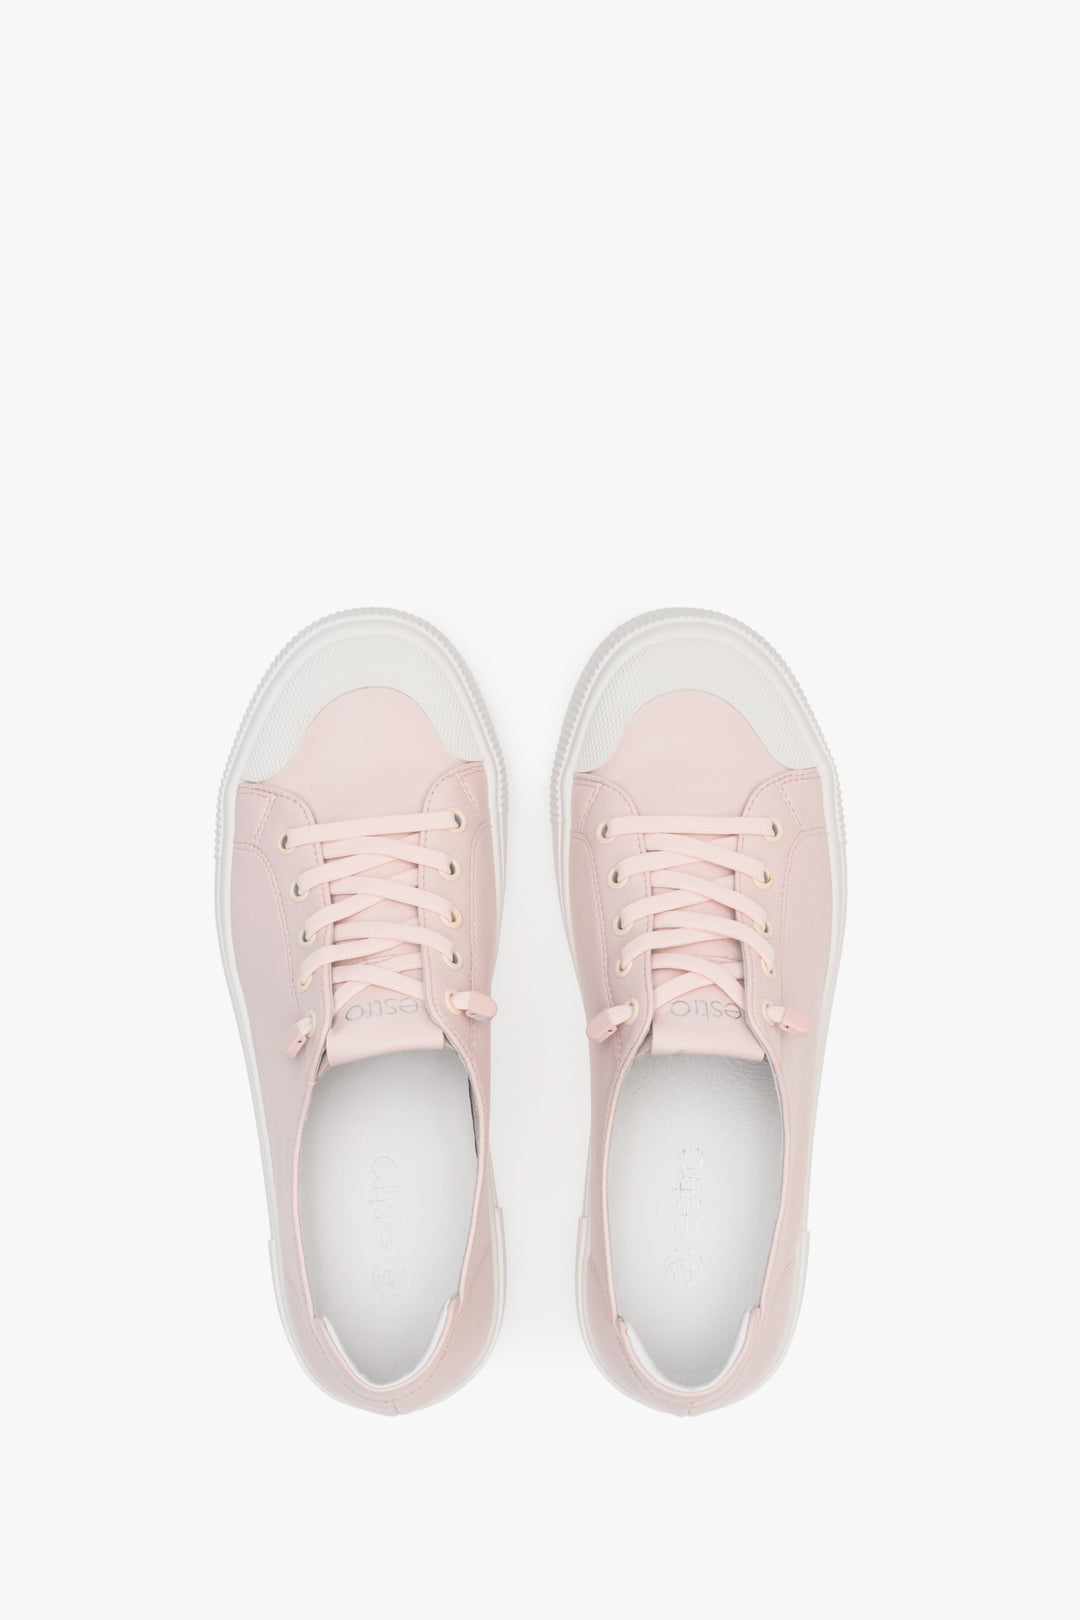 Women's Pale Pink Low-Top Genuine Leather Sneakers Estro ER00112701